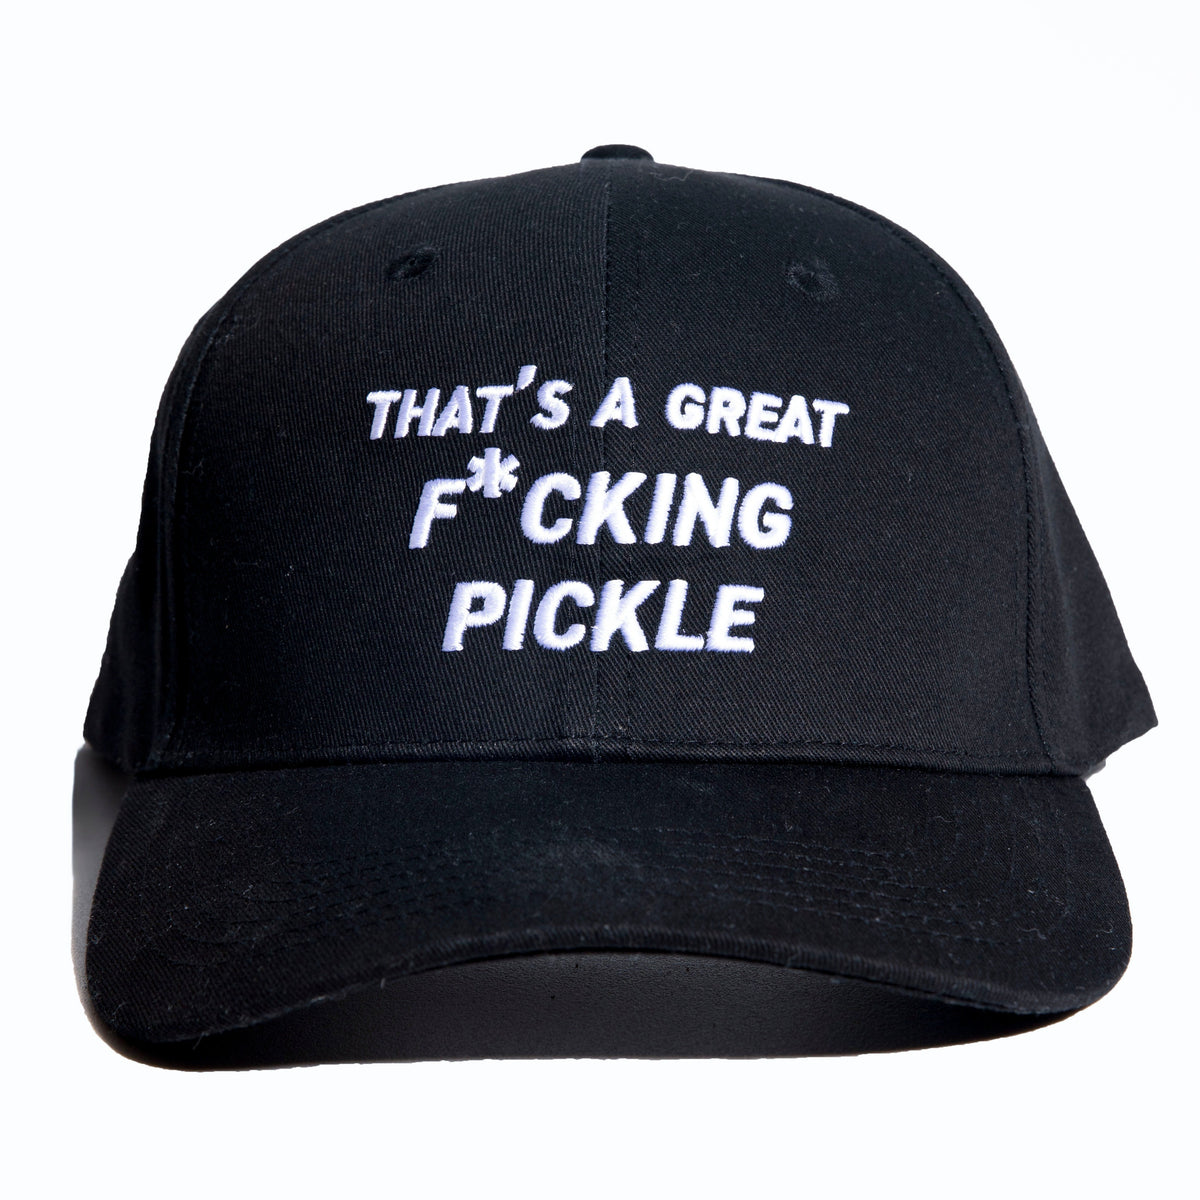 That's a Great F*cking Pickle Baseball Cap - Black